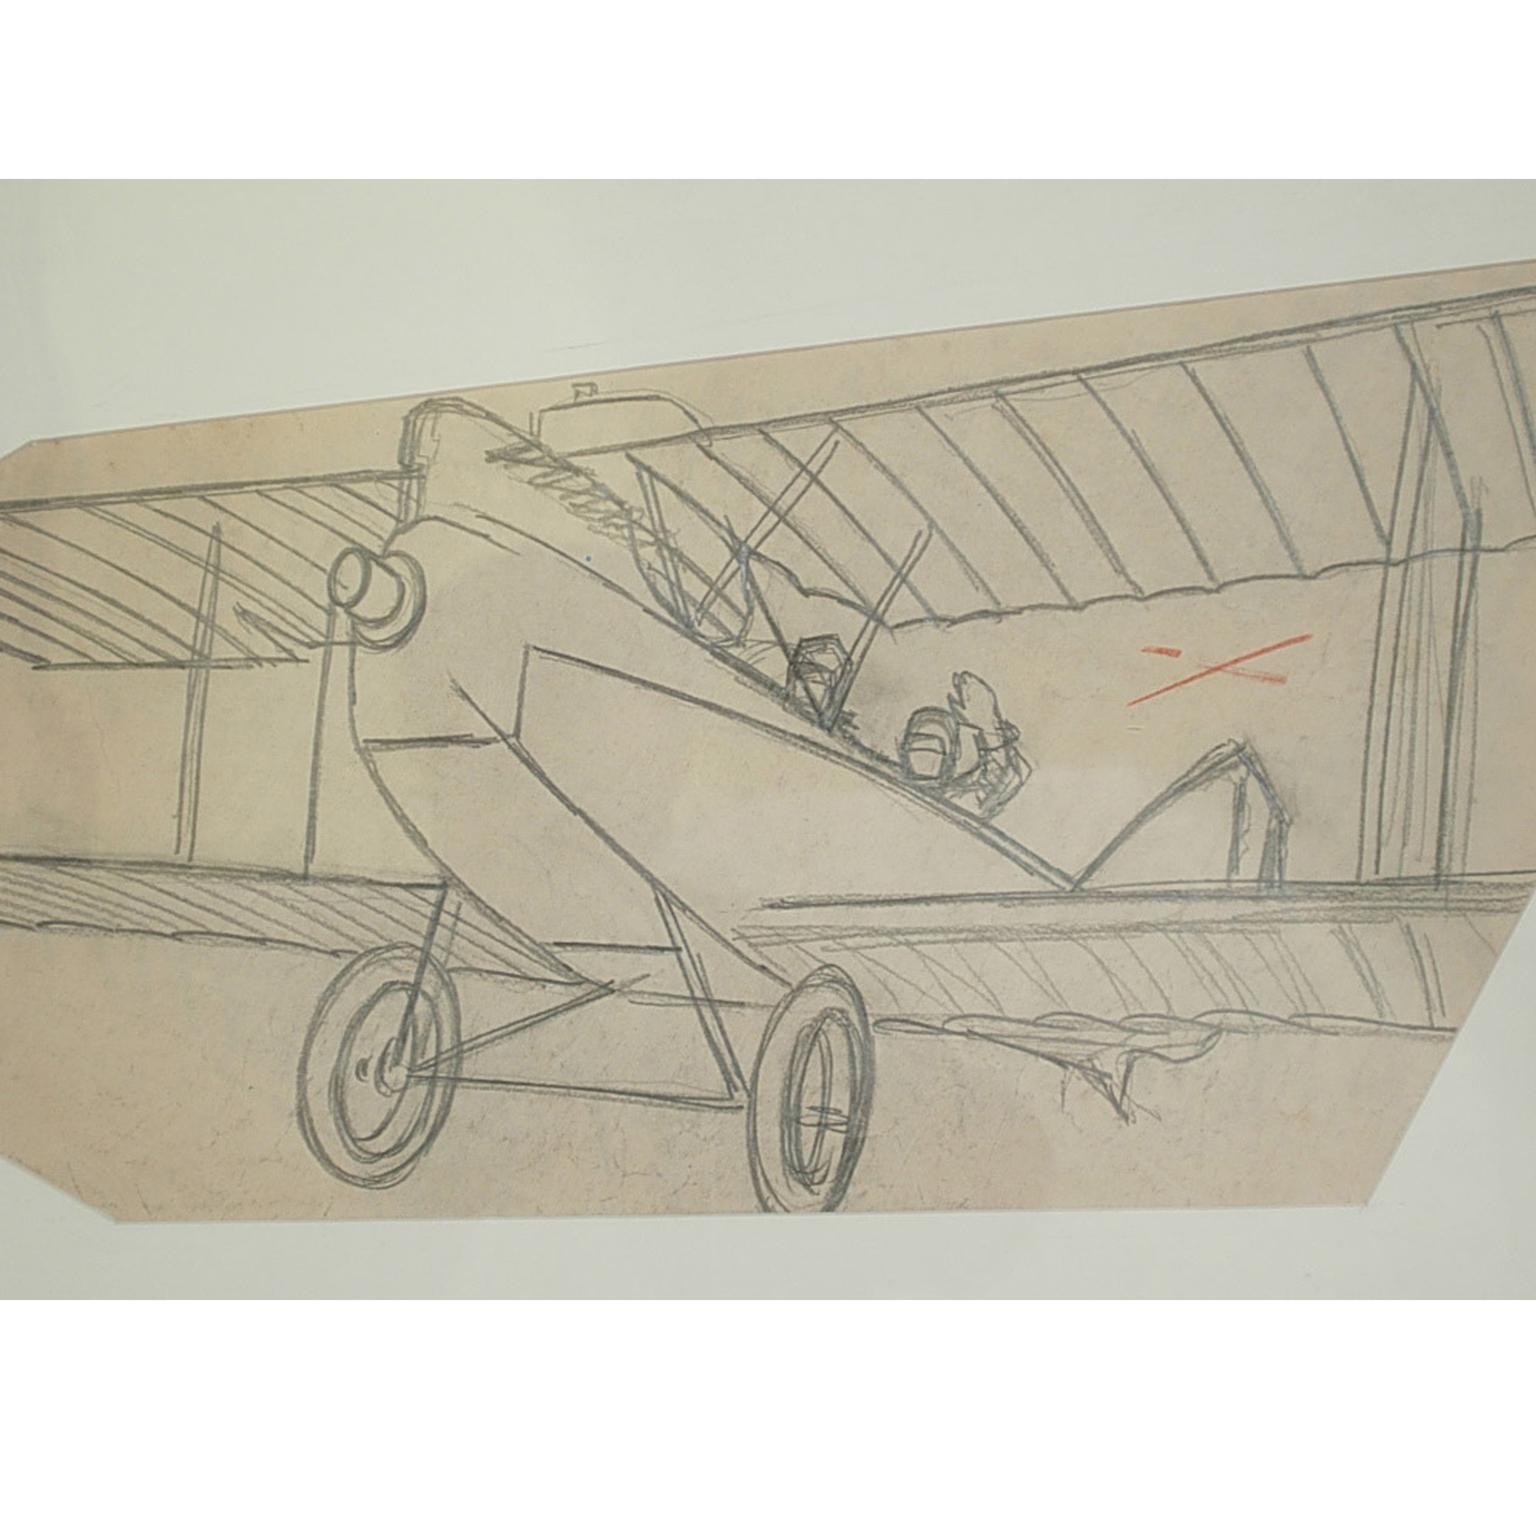 Pencil drawing by Riccardo Cavigioli in the early 1920s depicting a two-seat biplane airplane for reconnaissance Brandenburg C I of 1916, built by Ufag in Budapest. Measure with frame cm 68 x 38 inches 26.8 x 15.
Riccardo Cavigioli was born in Milan